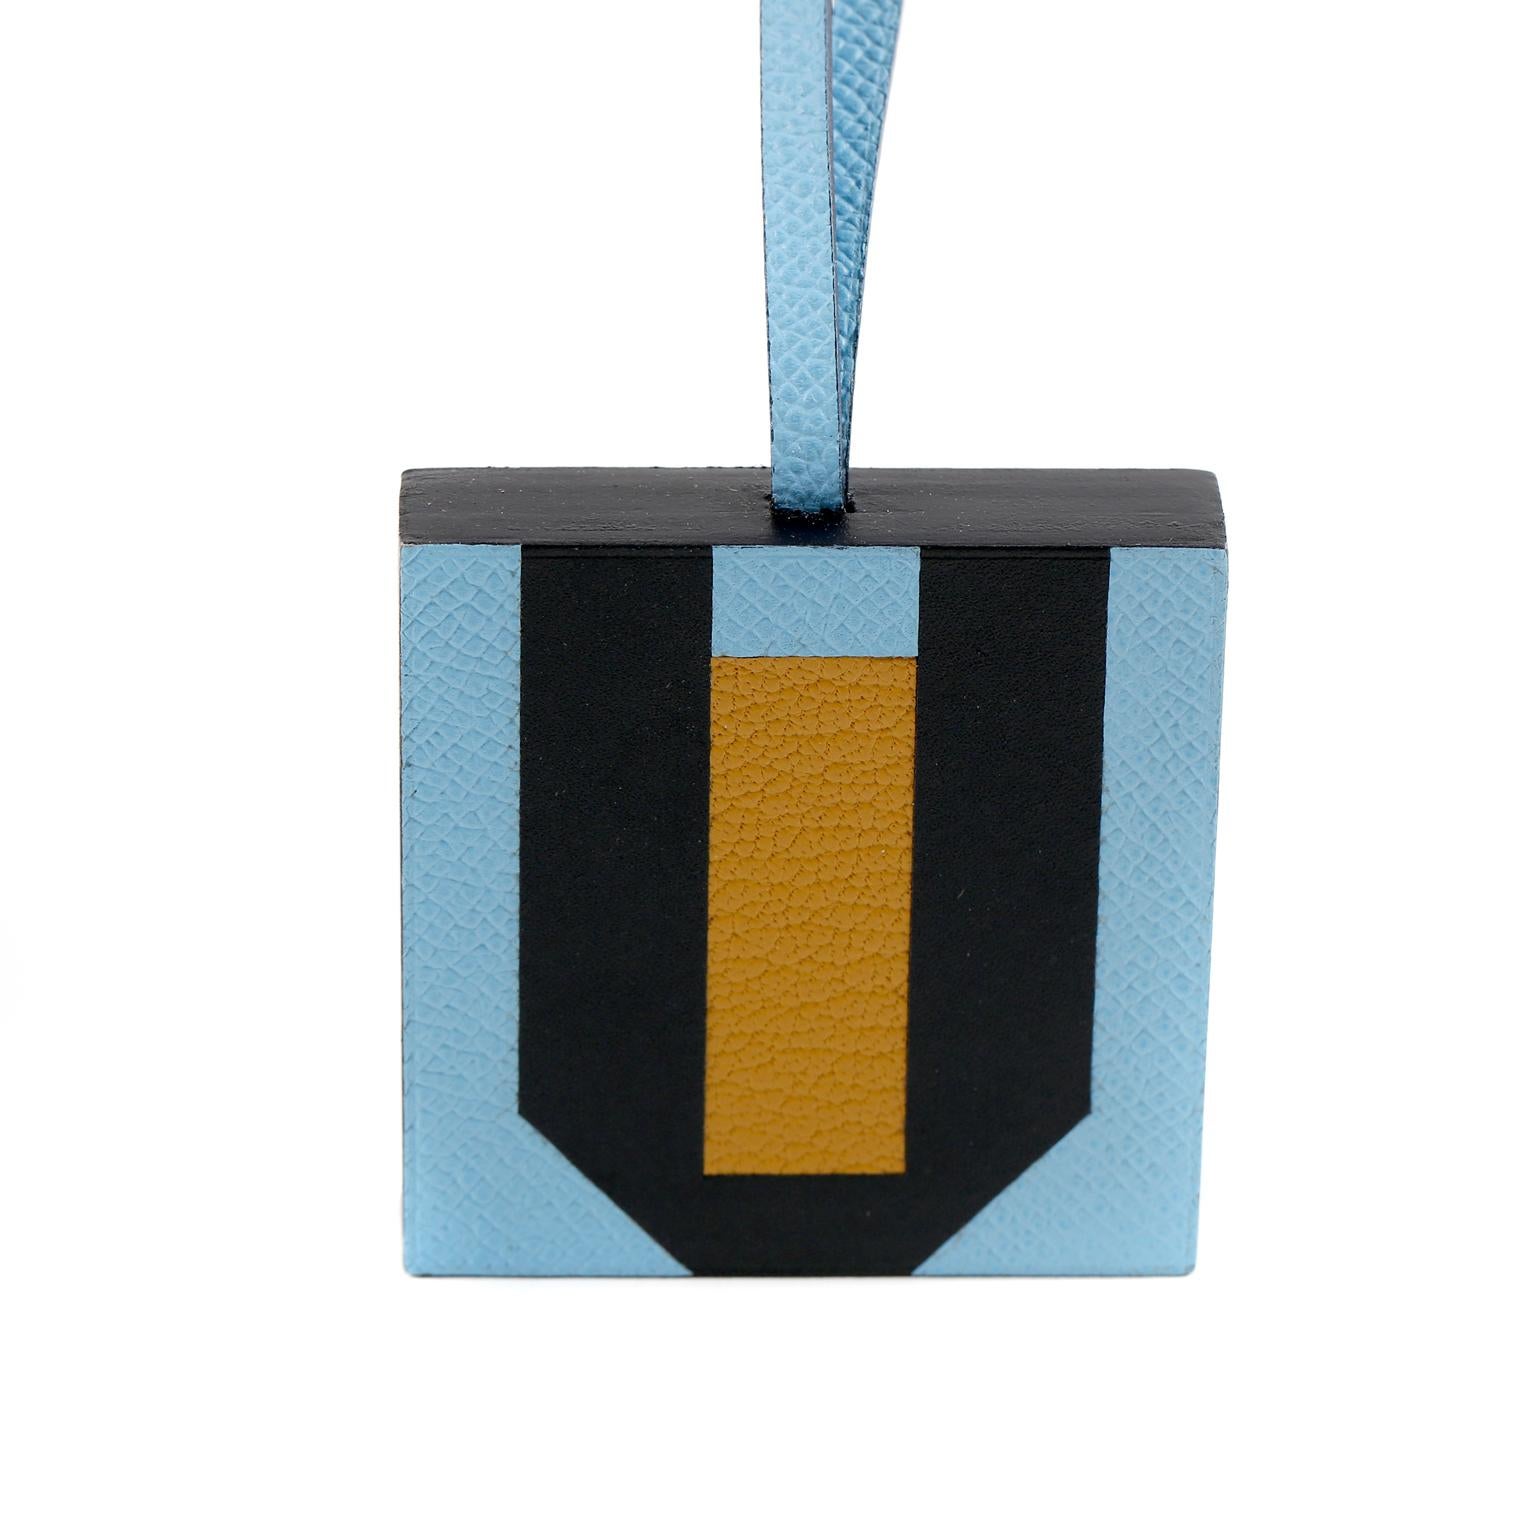 This authentic Hermès Lettre au Carre U Bag Charm is in pristine condition.  Epsom leather and goatskin.  Celeste, Ambre, and Bleu Obscur.  Approximately 2.4” x 2.4” x 0.6”

